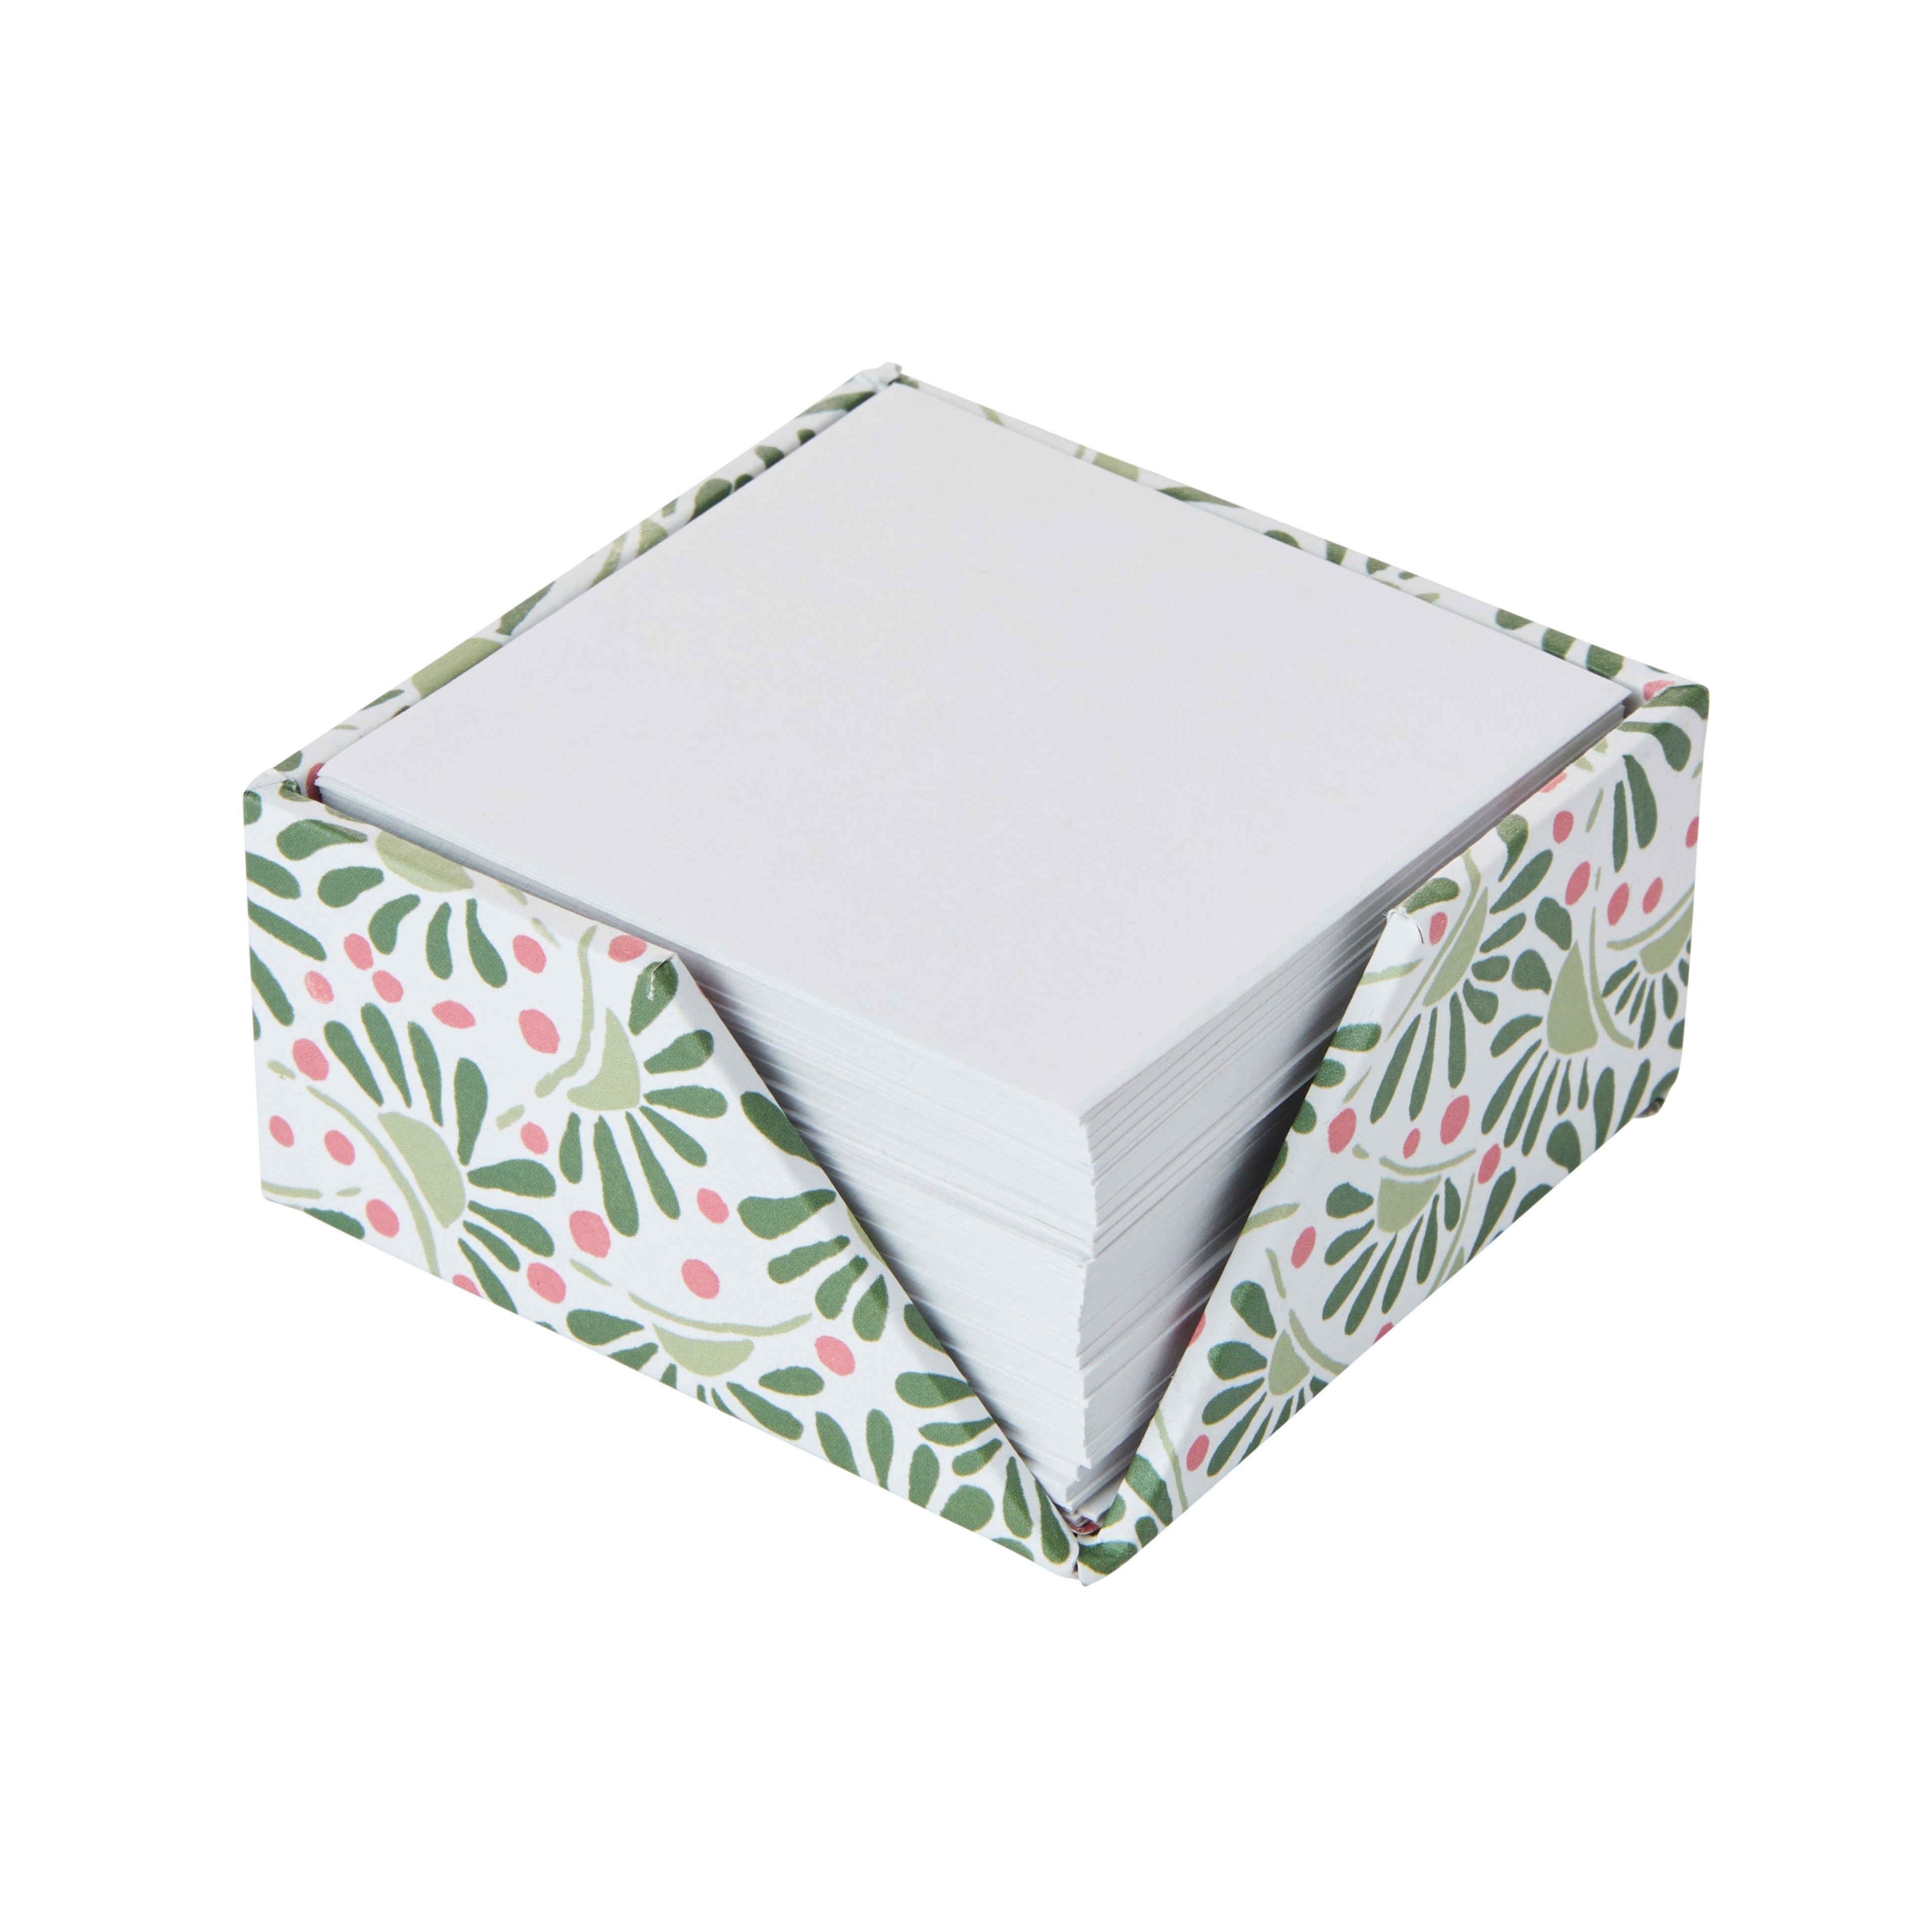 Nina Campbell post it memo box in coral colour way stationery collection on white background